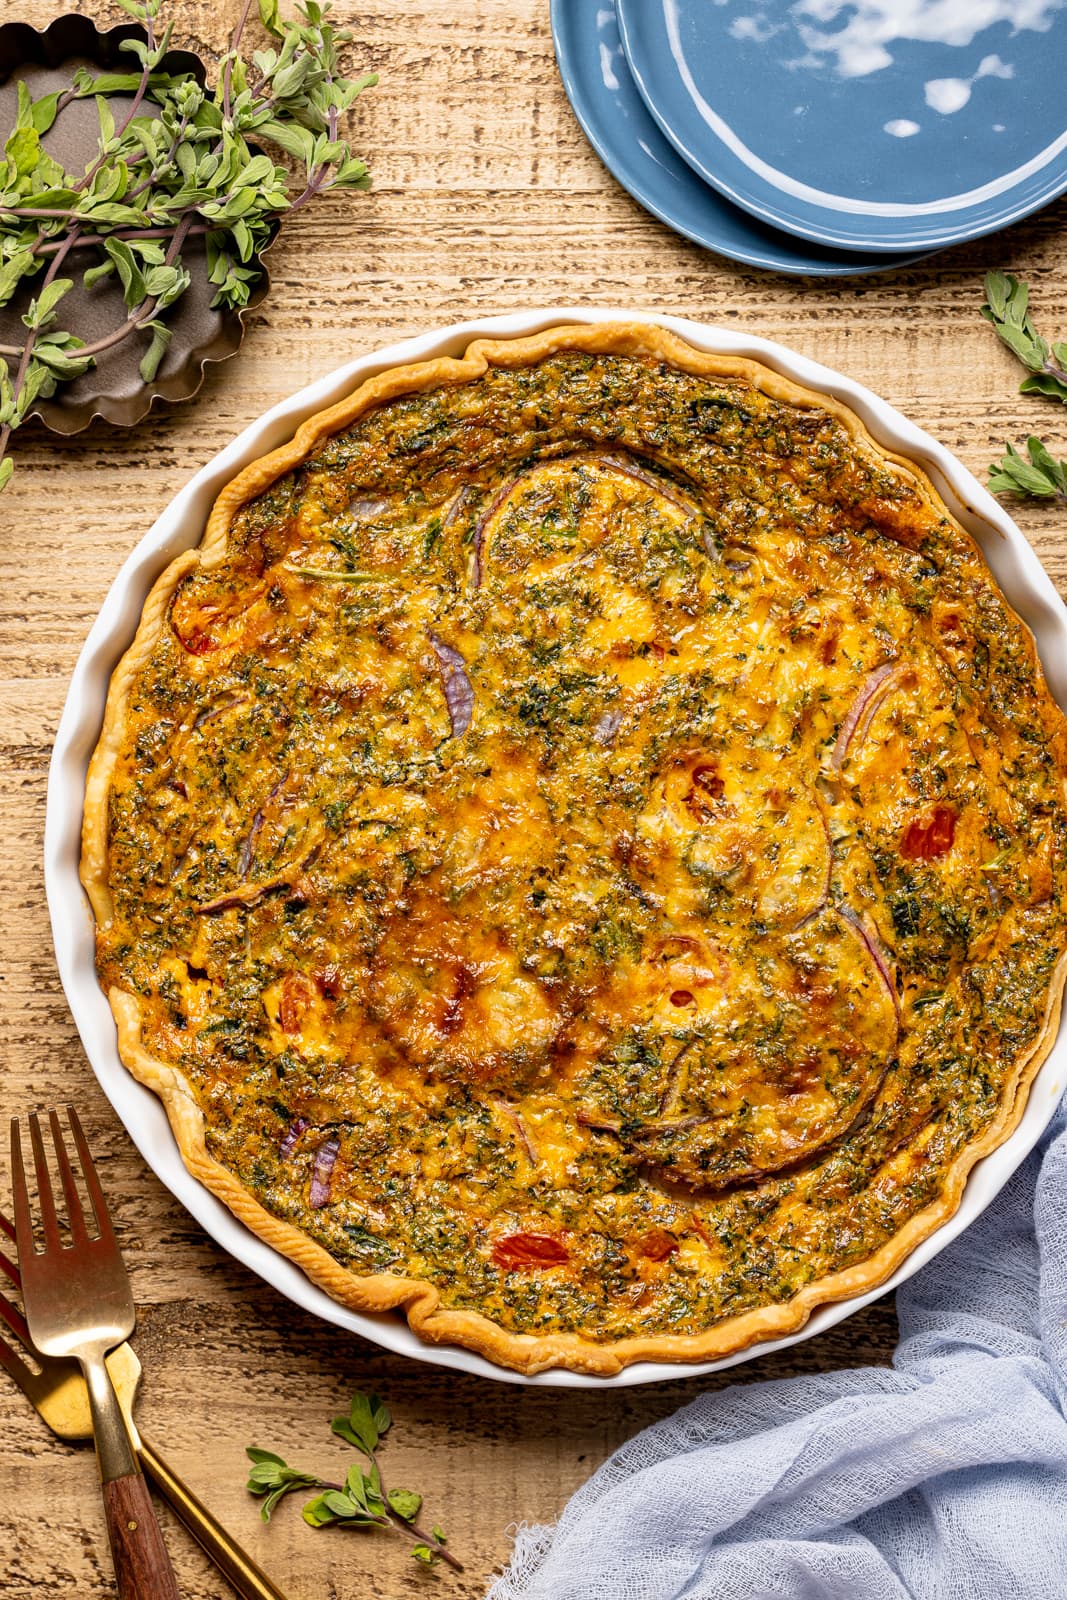 Baked quiche in a baking dish on a brown wood table with herbs + seasonings and a blue napkin.